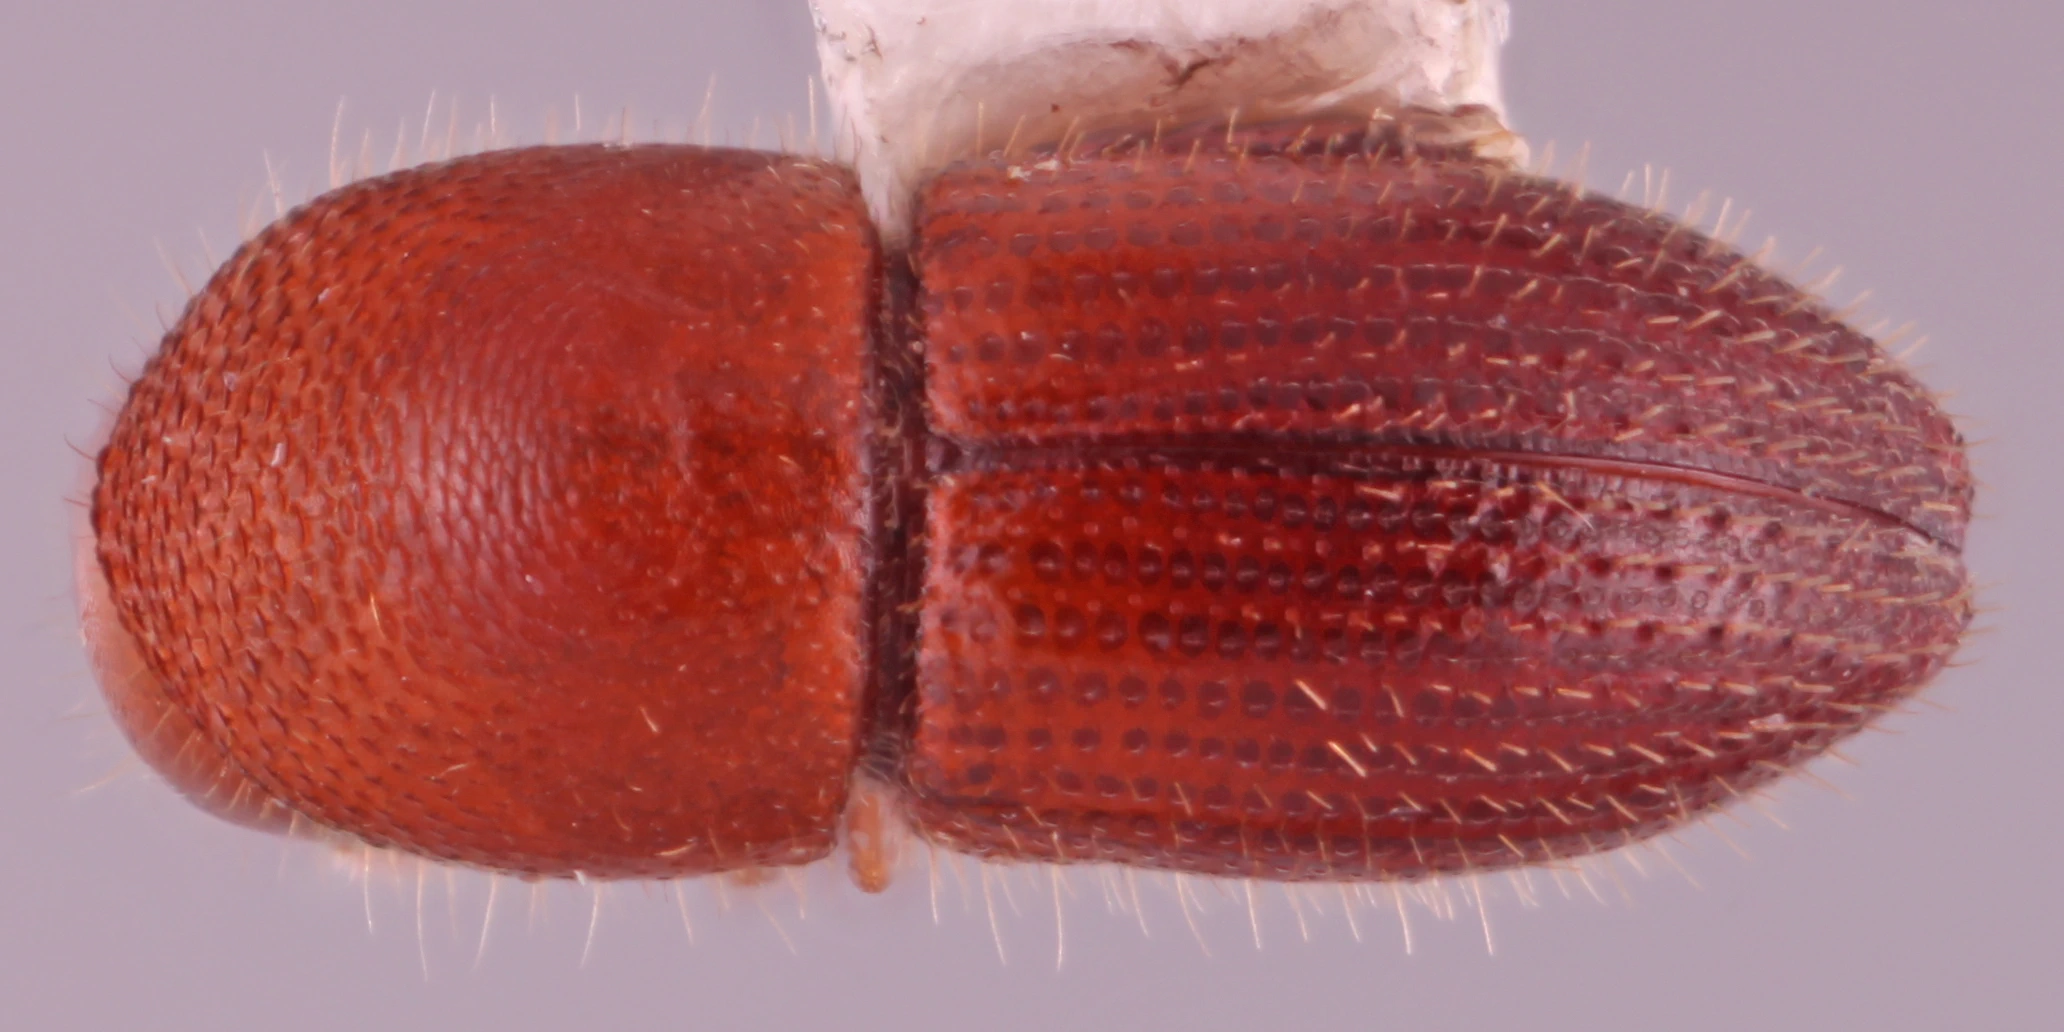 A photograph shows the Coptoborus bettysmithae, which is round, amber colored and dotted with little spines.